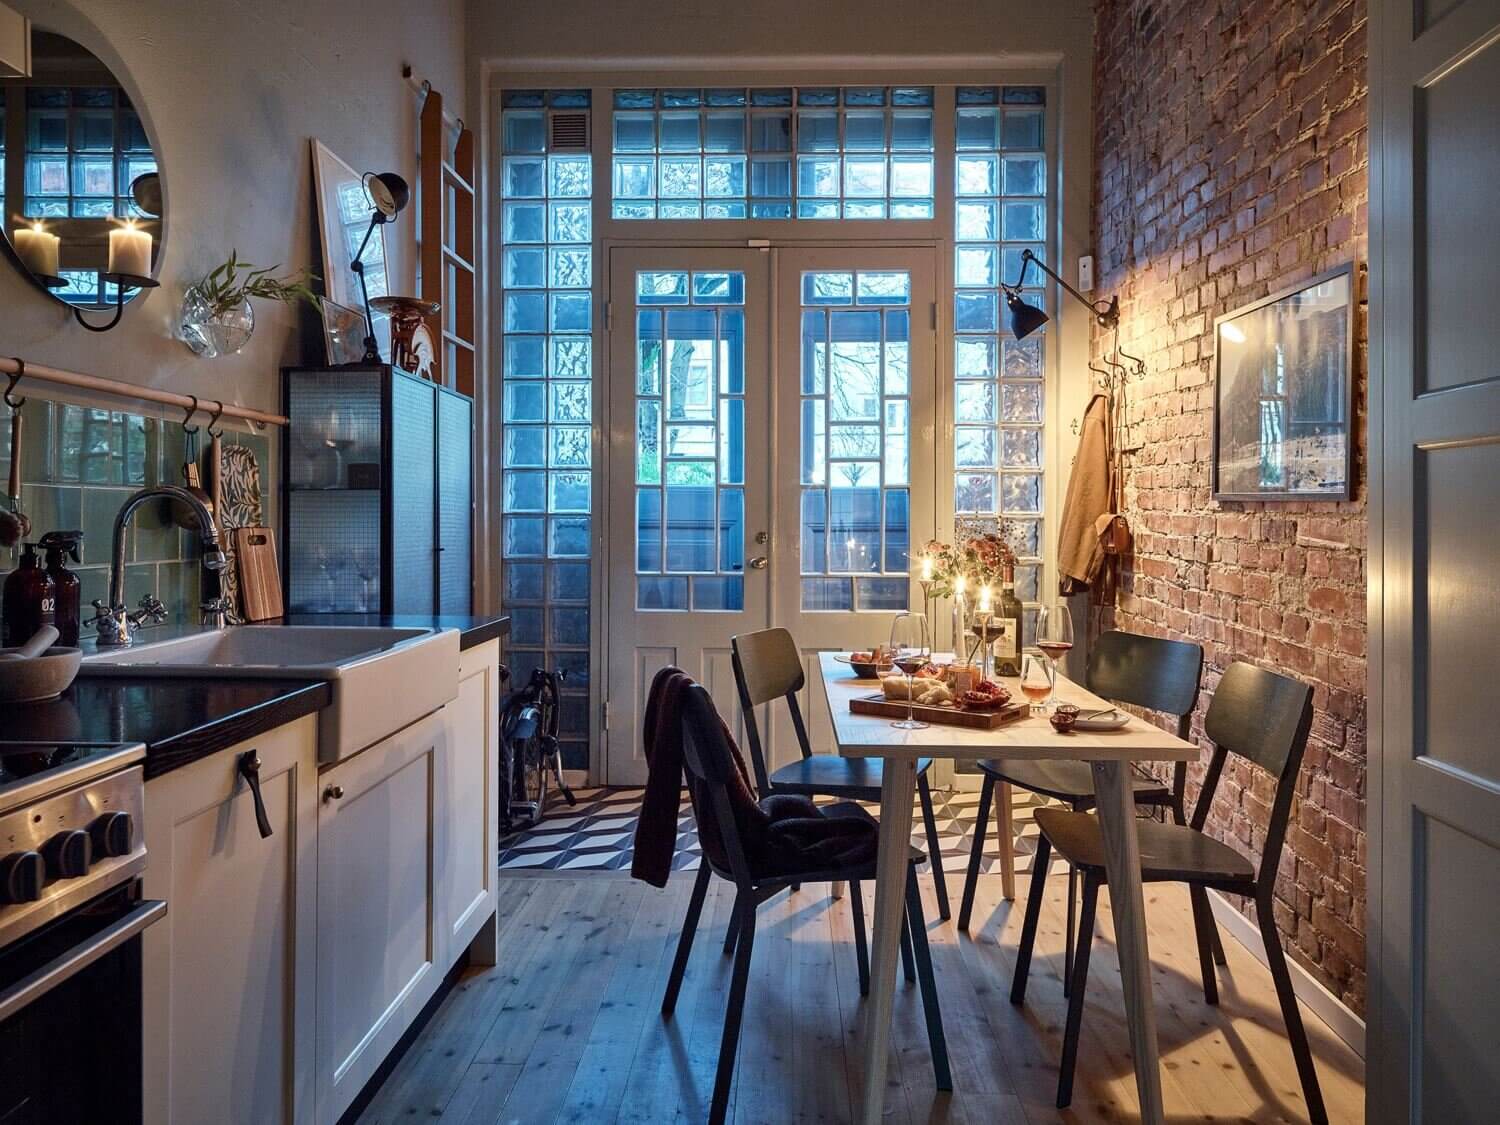 Vintage Touches and Exposed Brick in a Beautiful Scandinavian Home